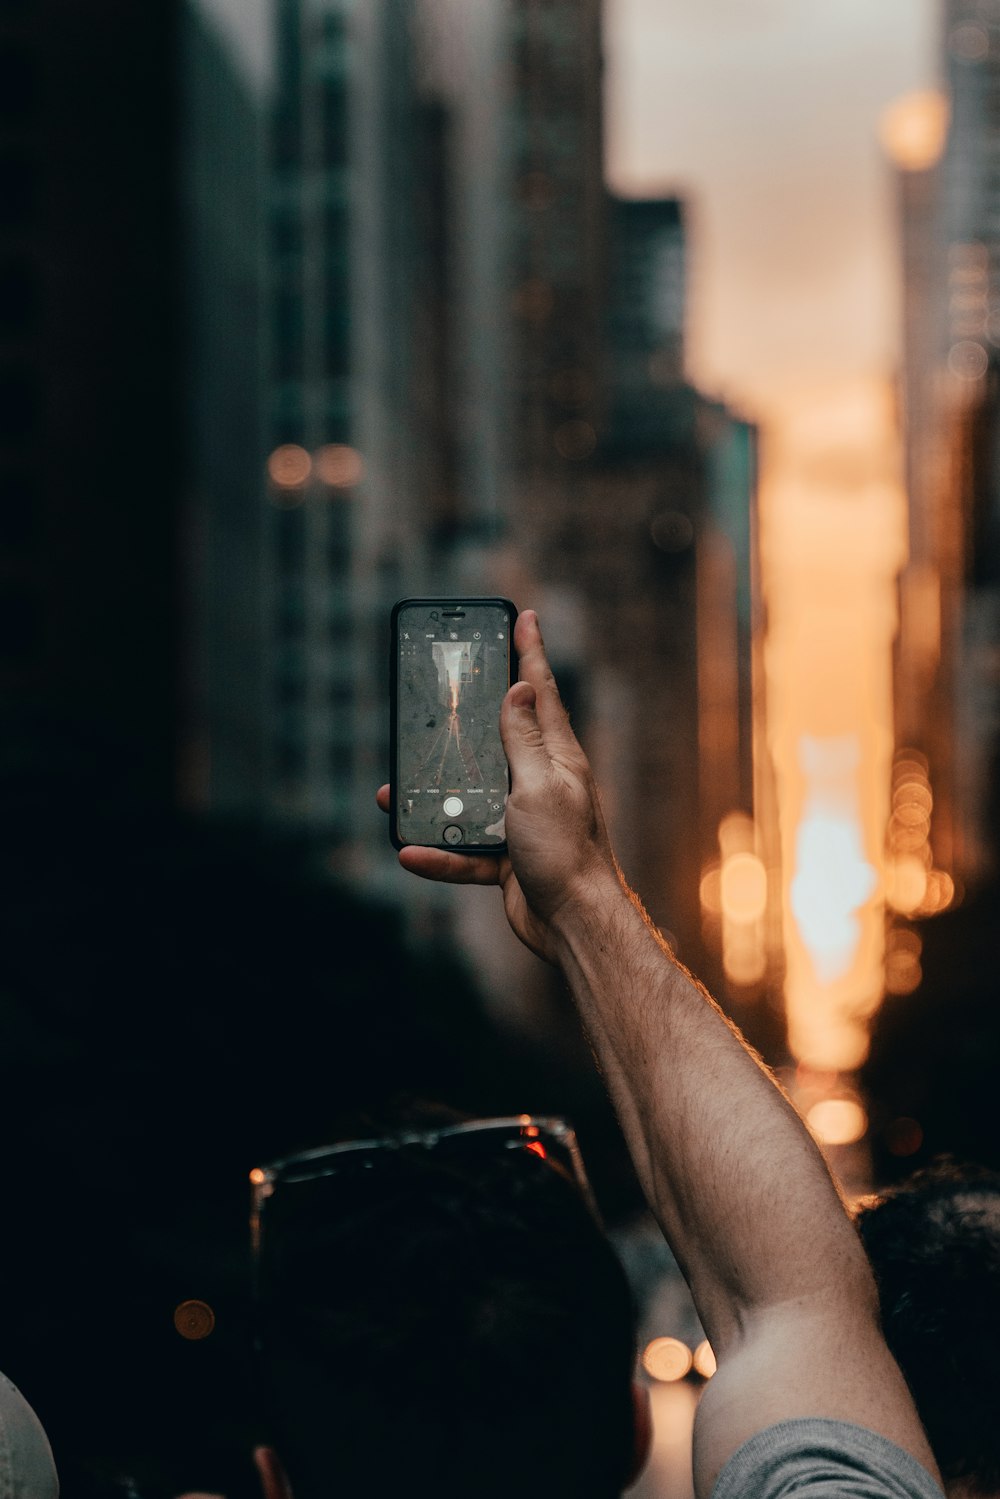 person holding black smartphone during night time